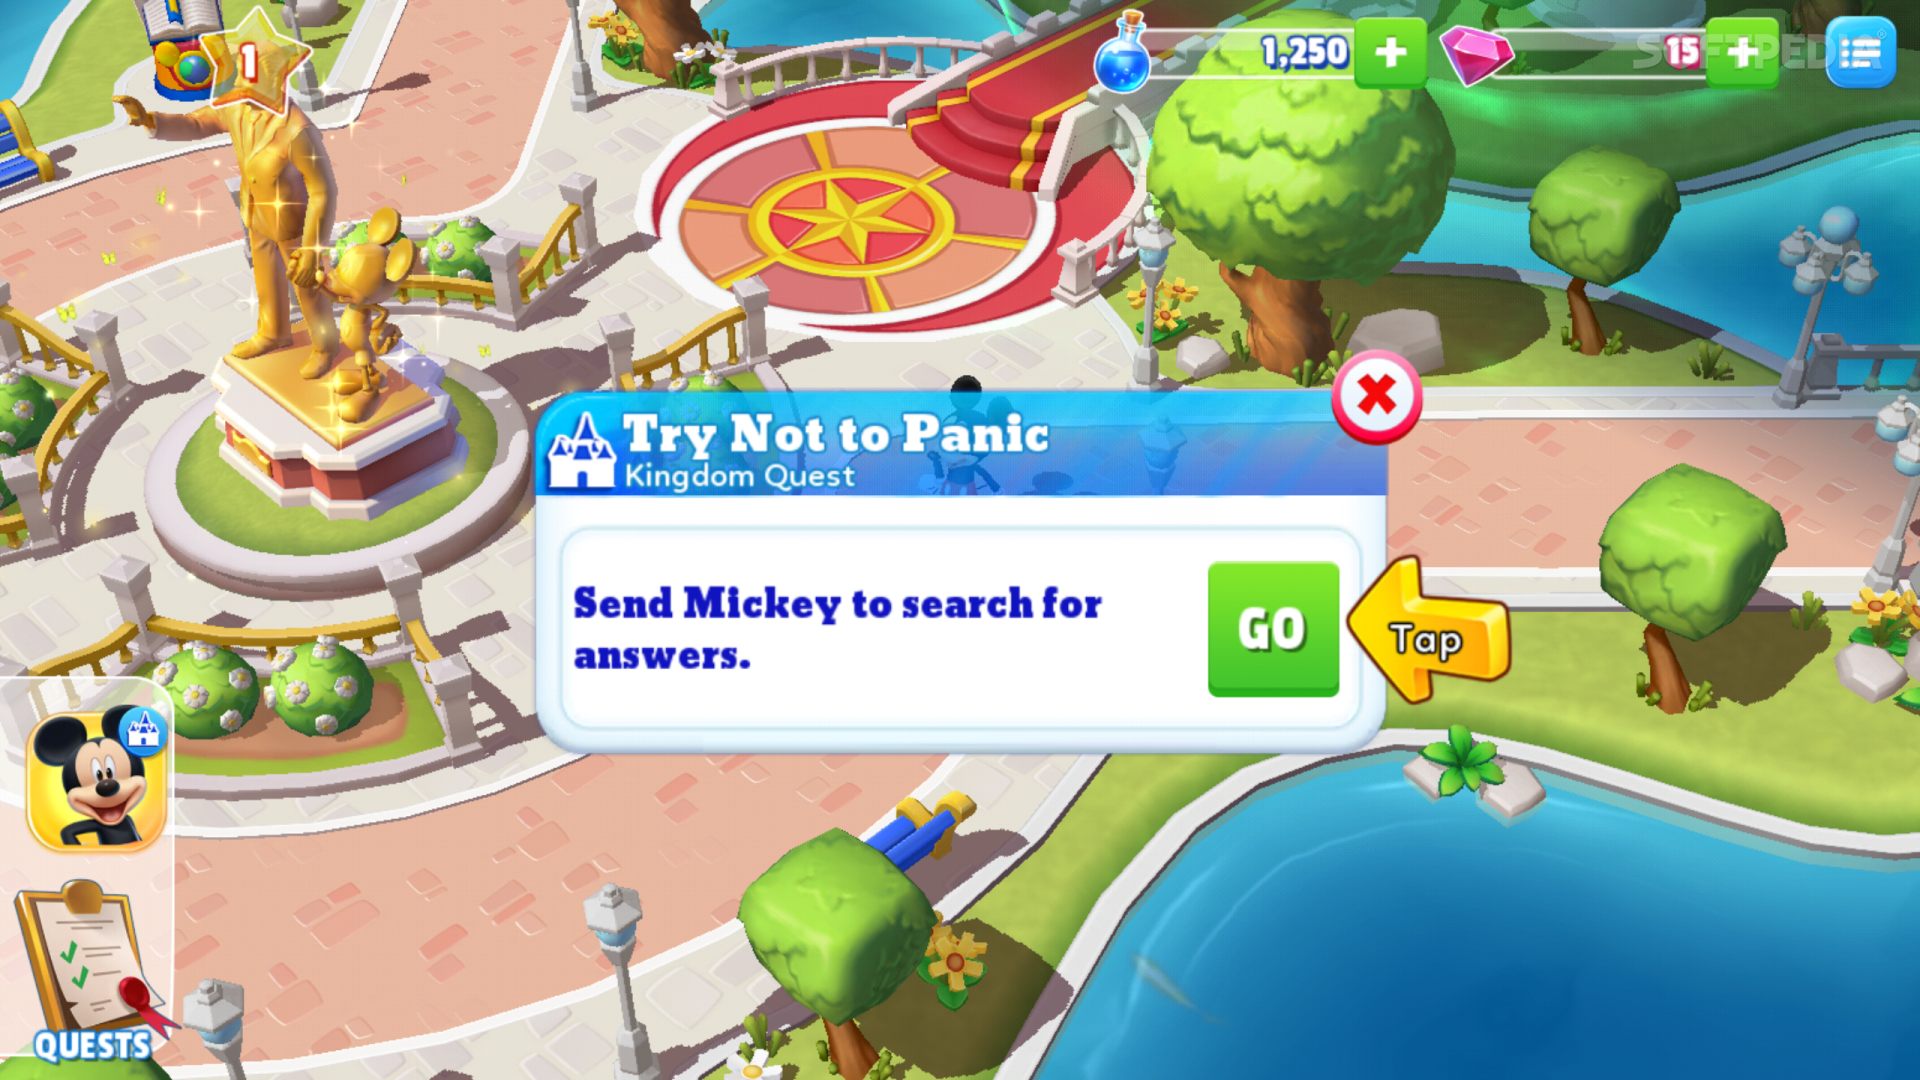 on disney magical kingdoms how long does it mini events to respawn